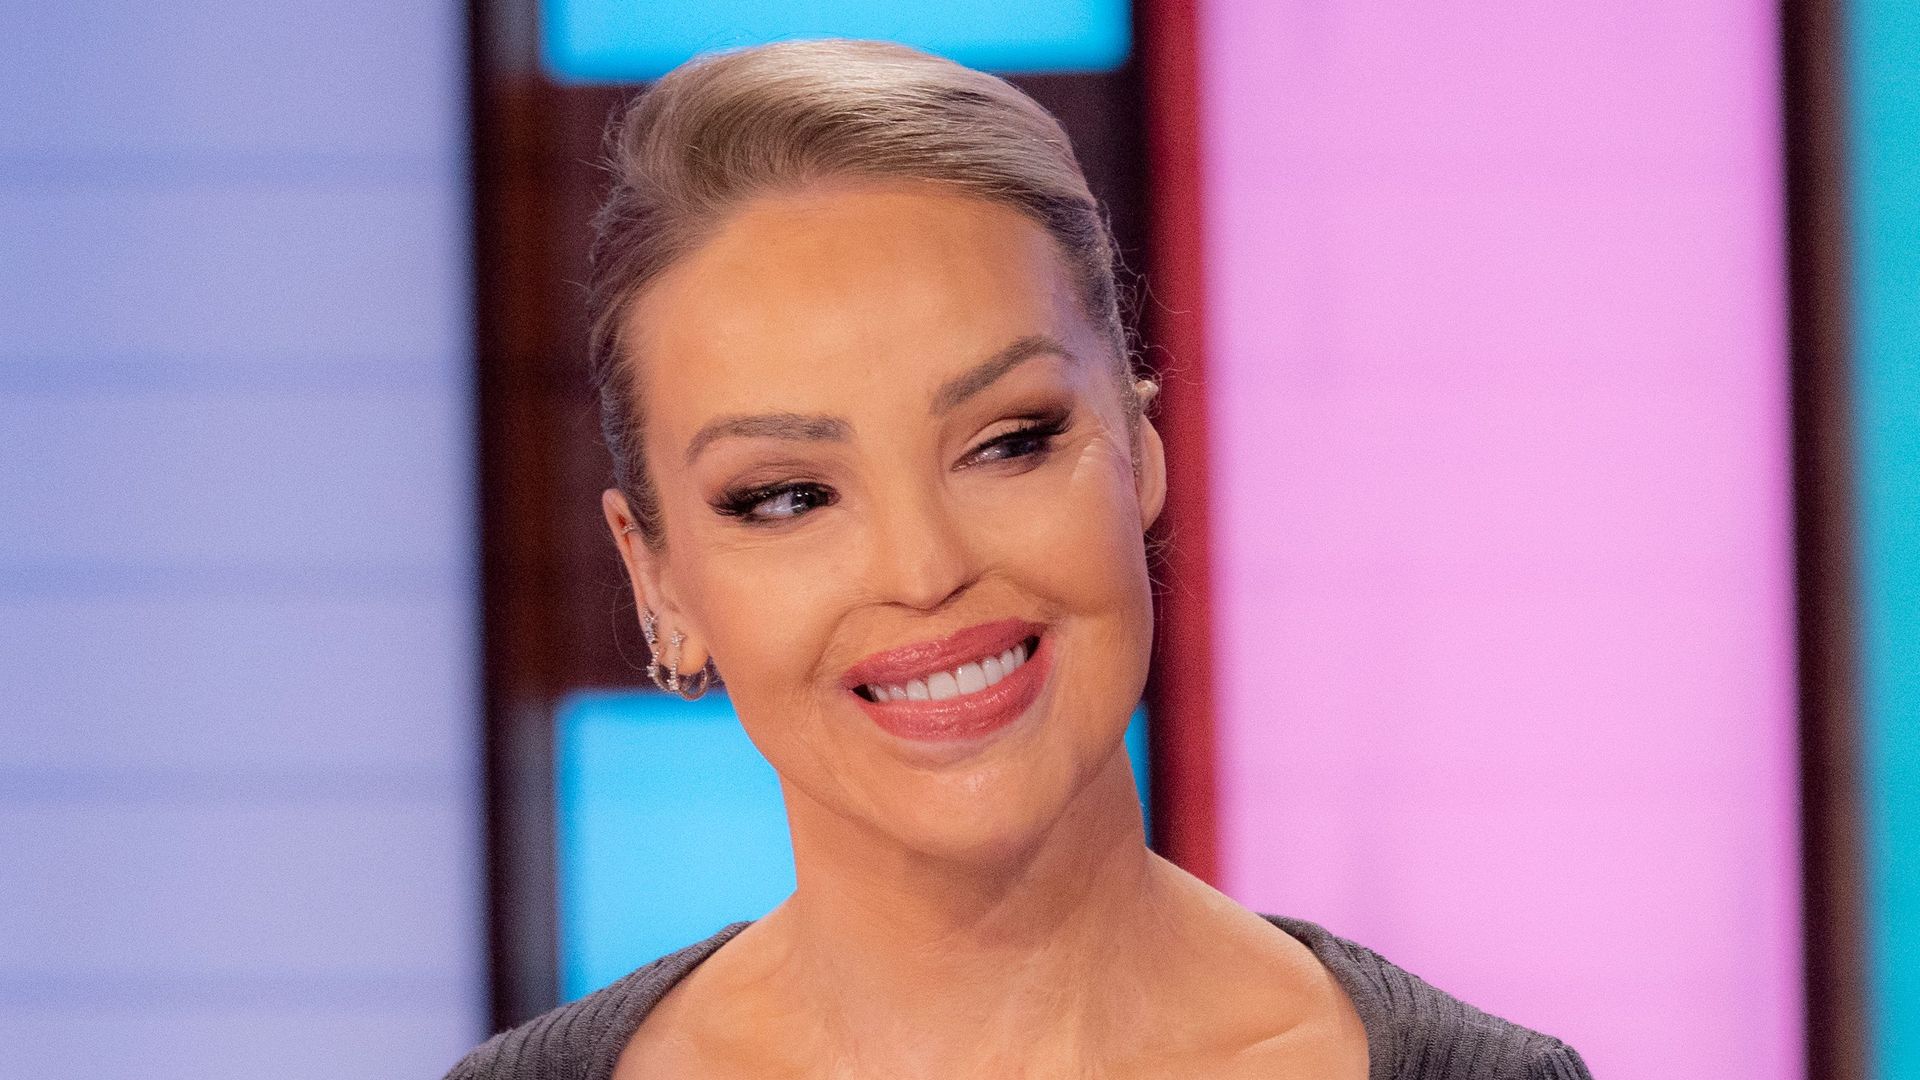 Katie Piper on Loose Women in a grey top